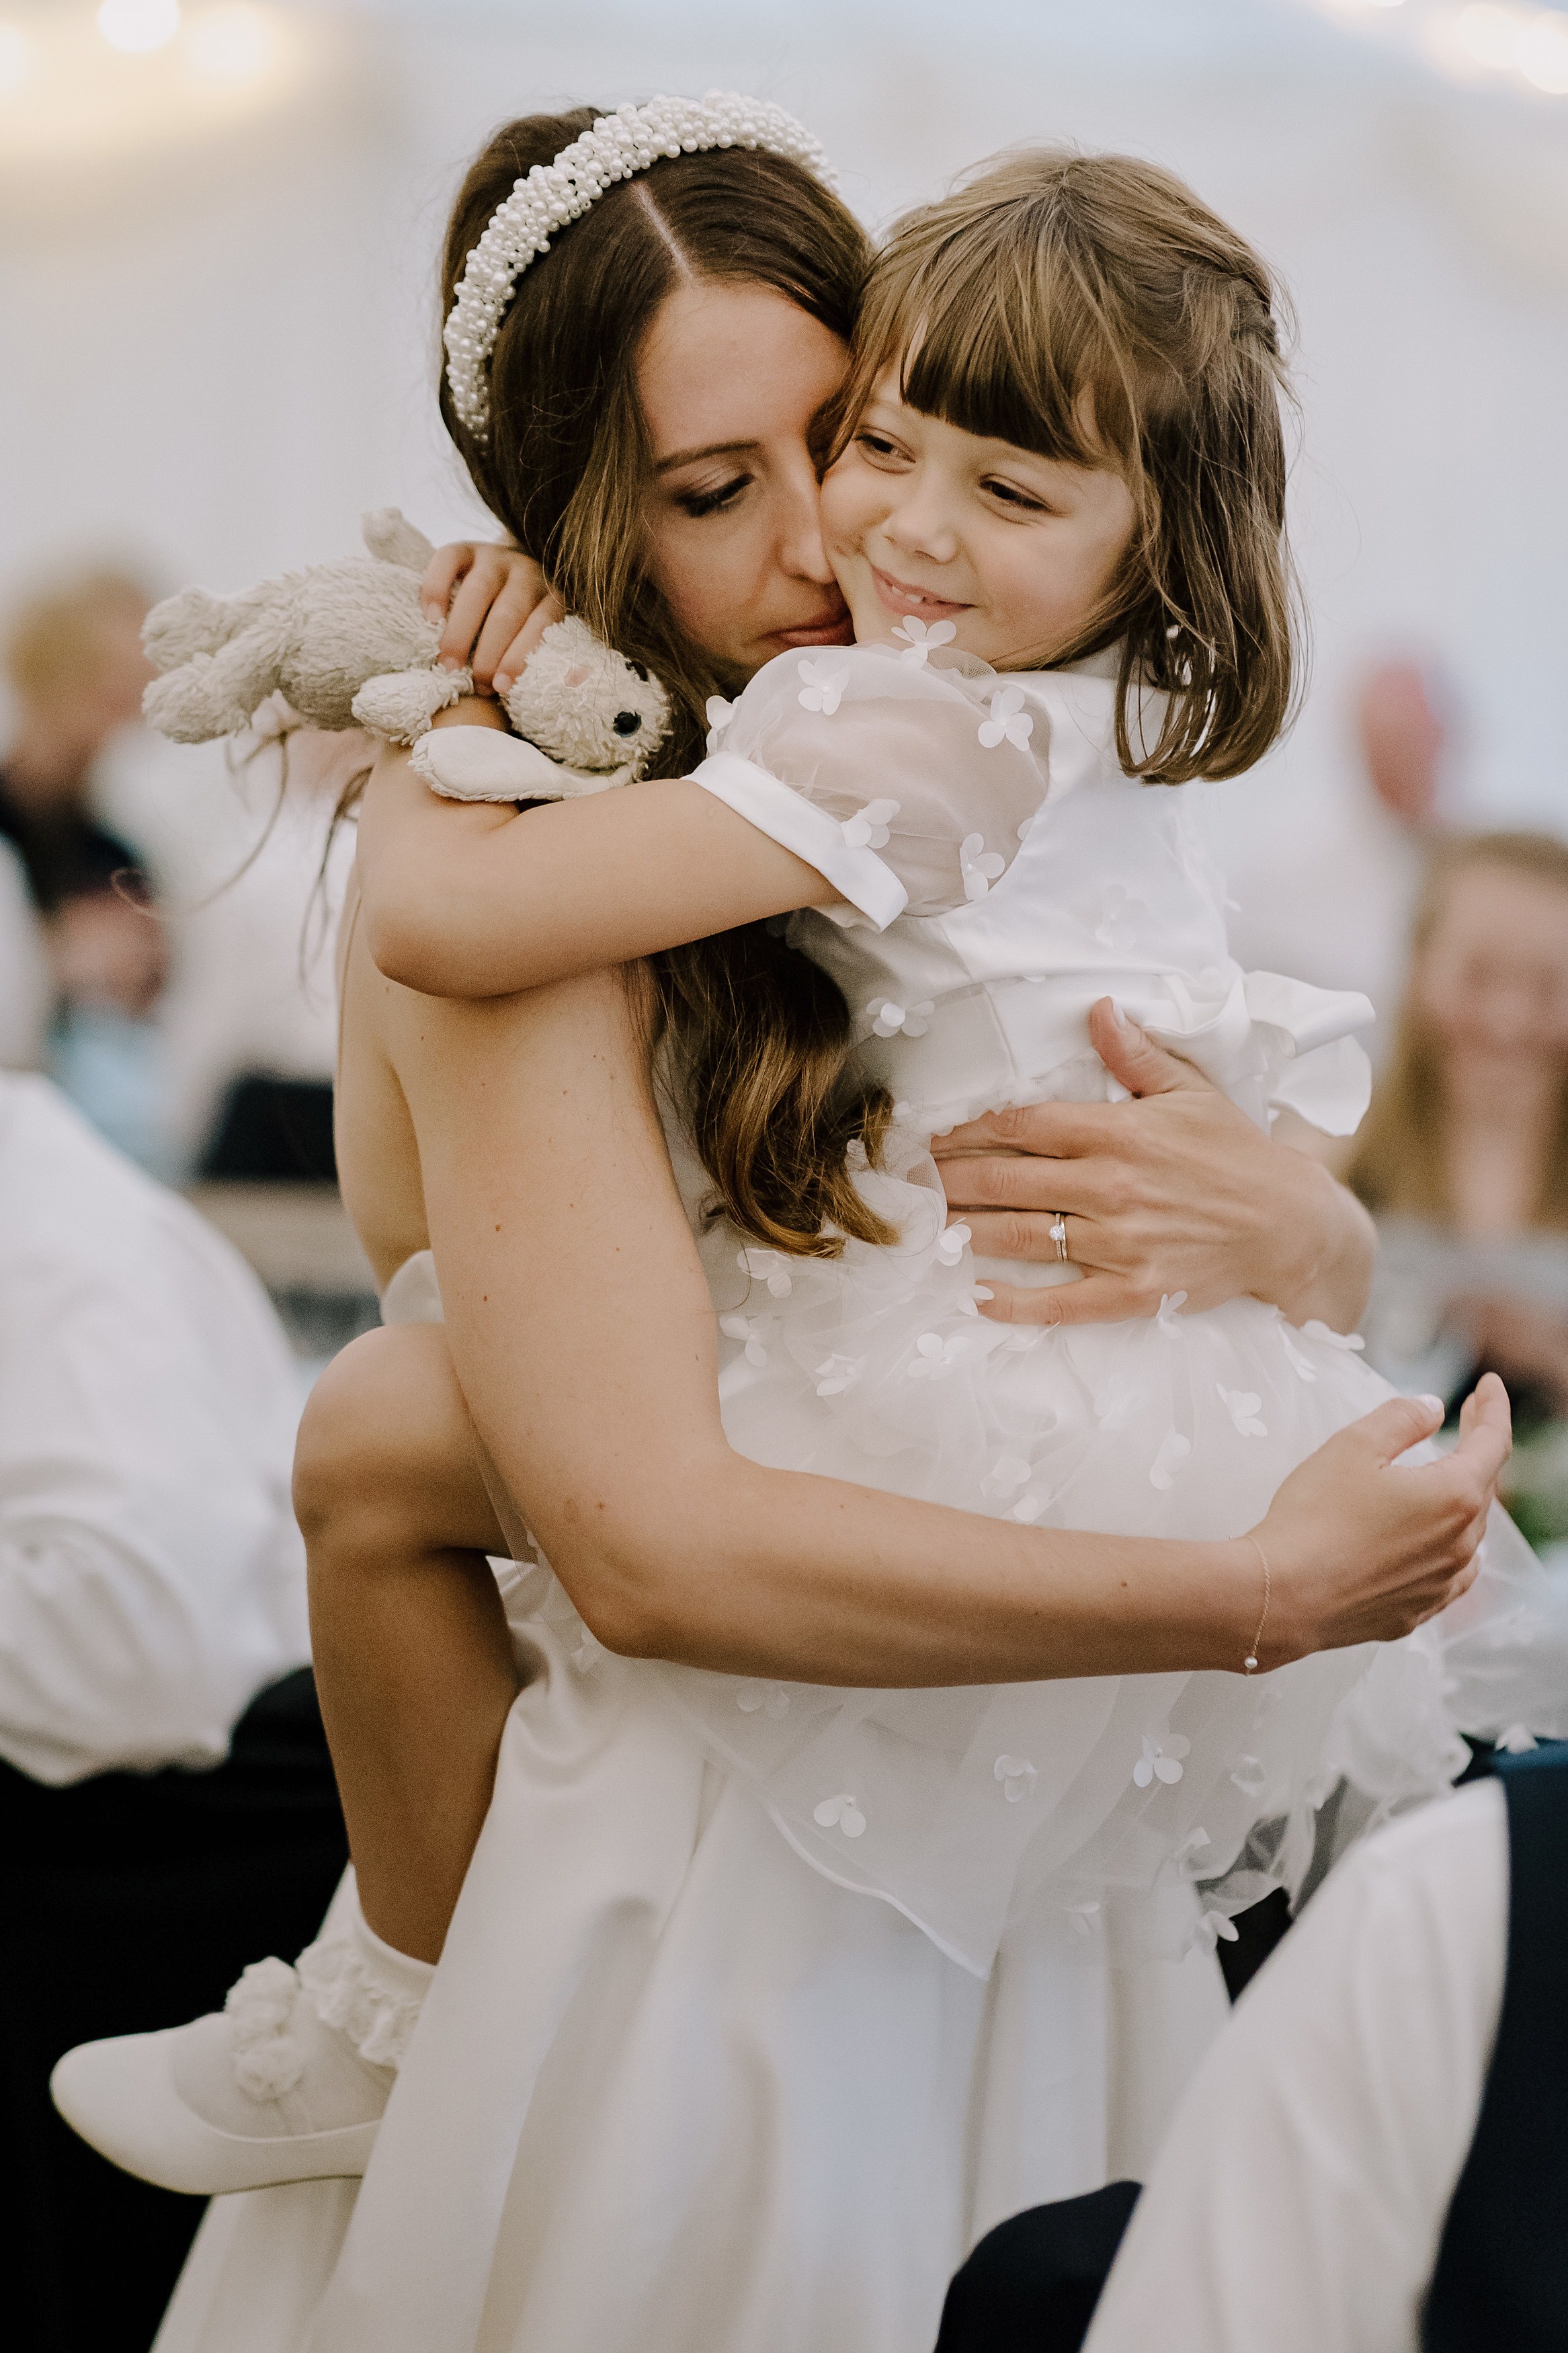 The bride carrying one of her flower girls